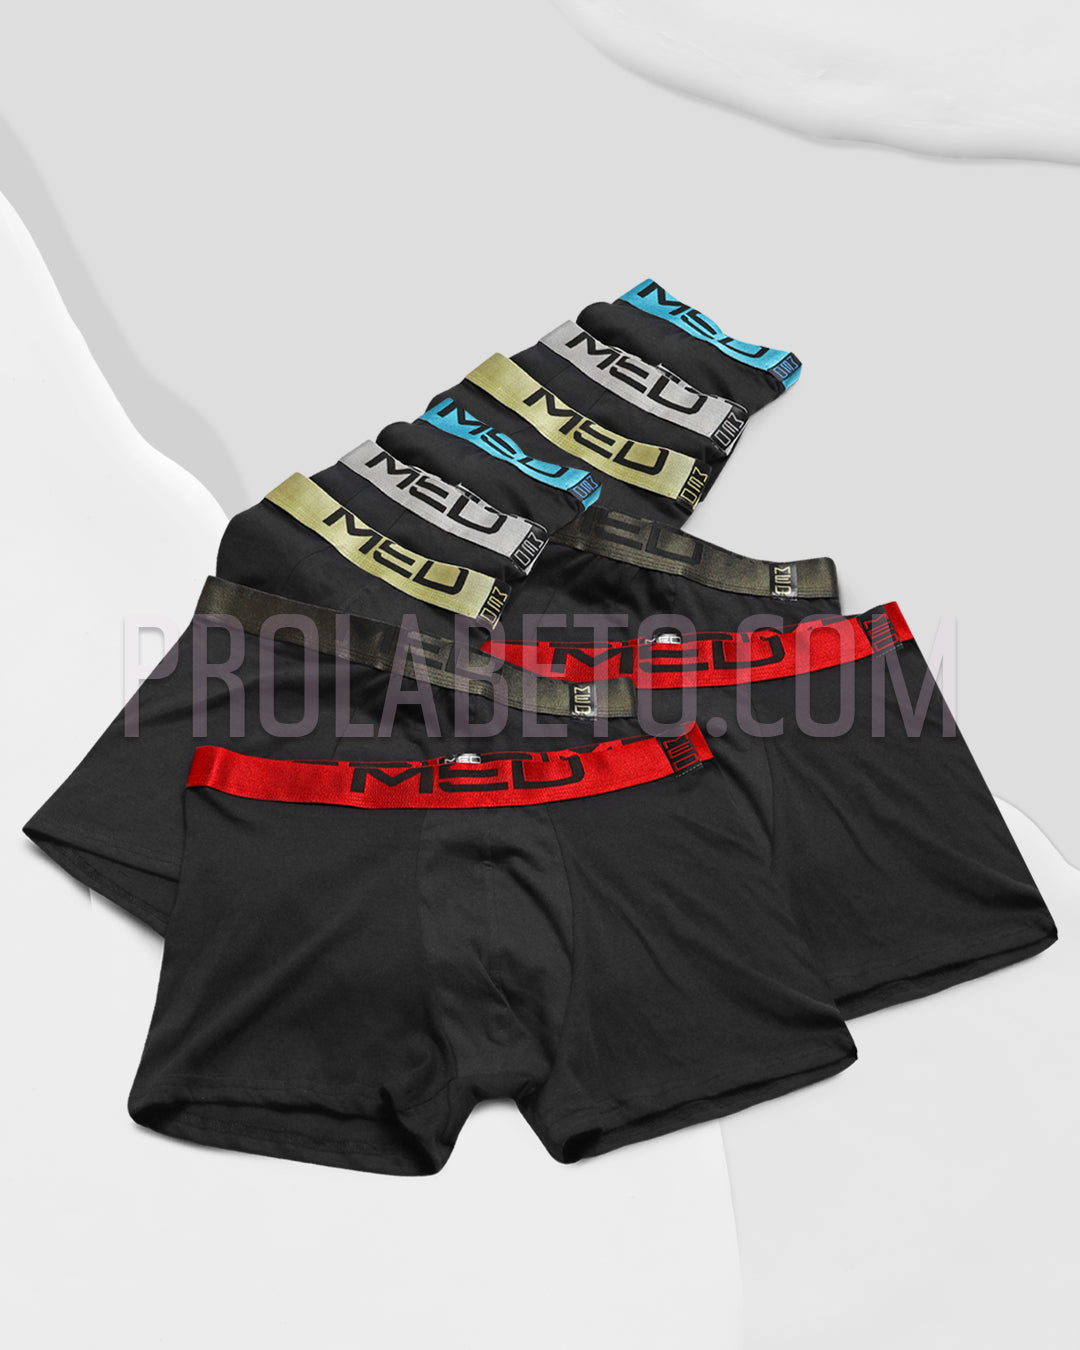 MED ROY BOXERS - ΣΕΤ 10